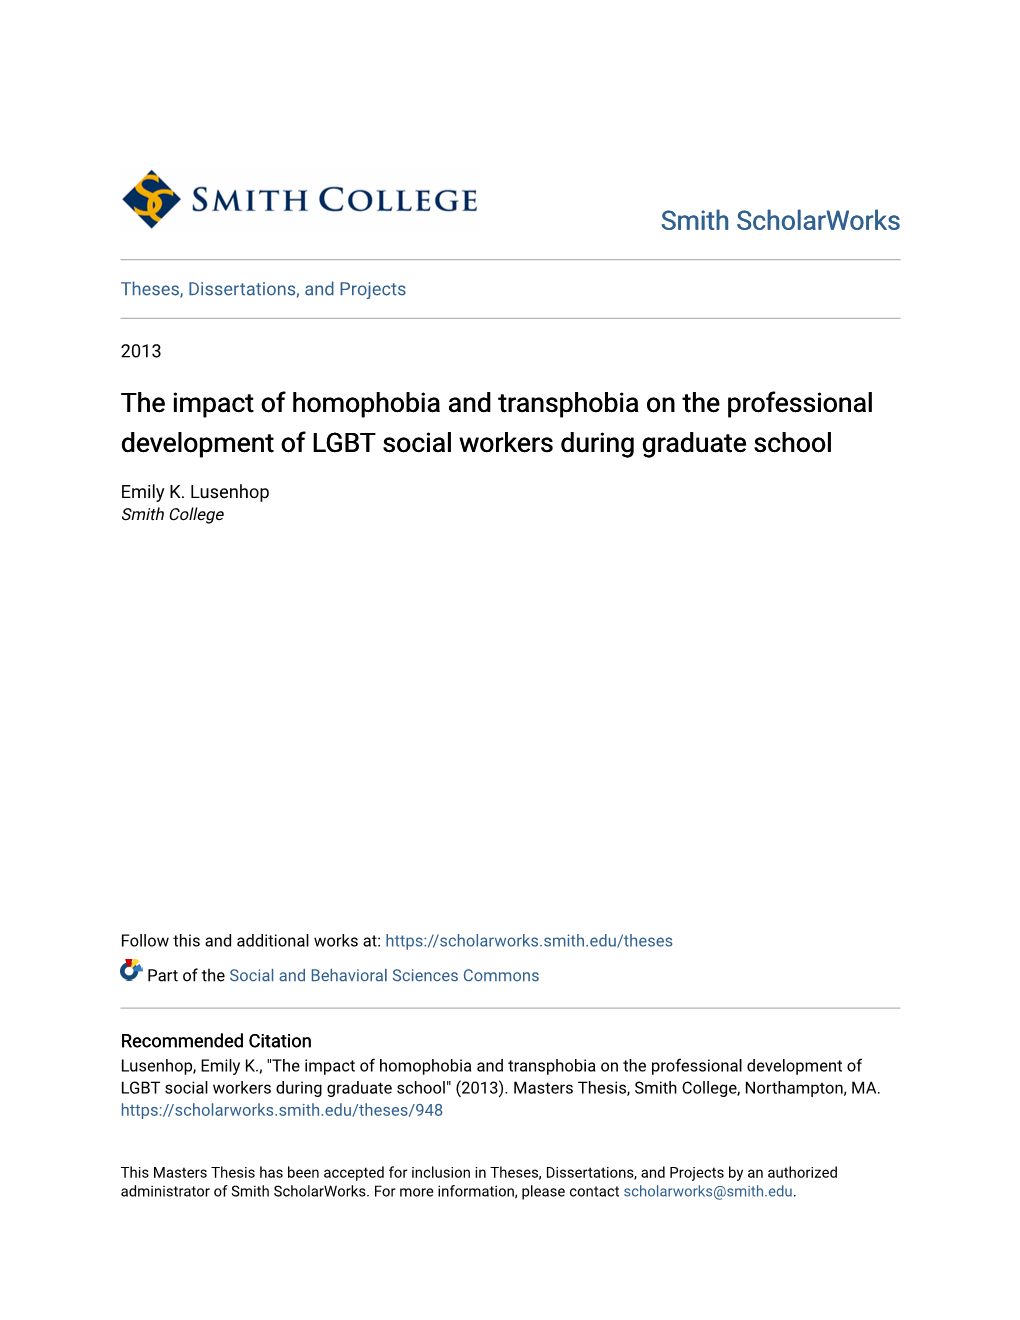 The Impact of Homophobia and Transphobia on the Professional Development of LGBT Social Workers During Graduate School